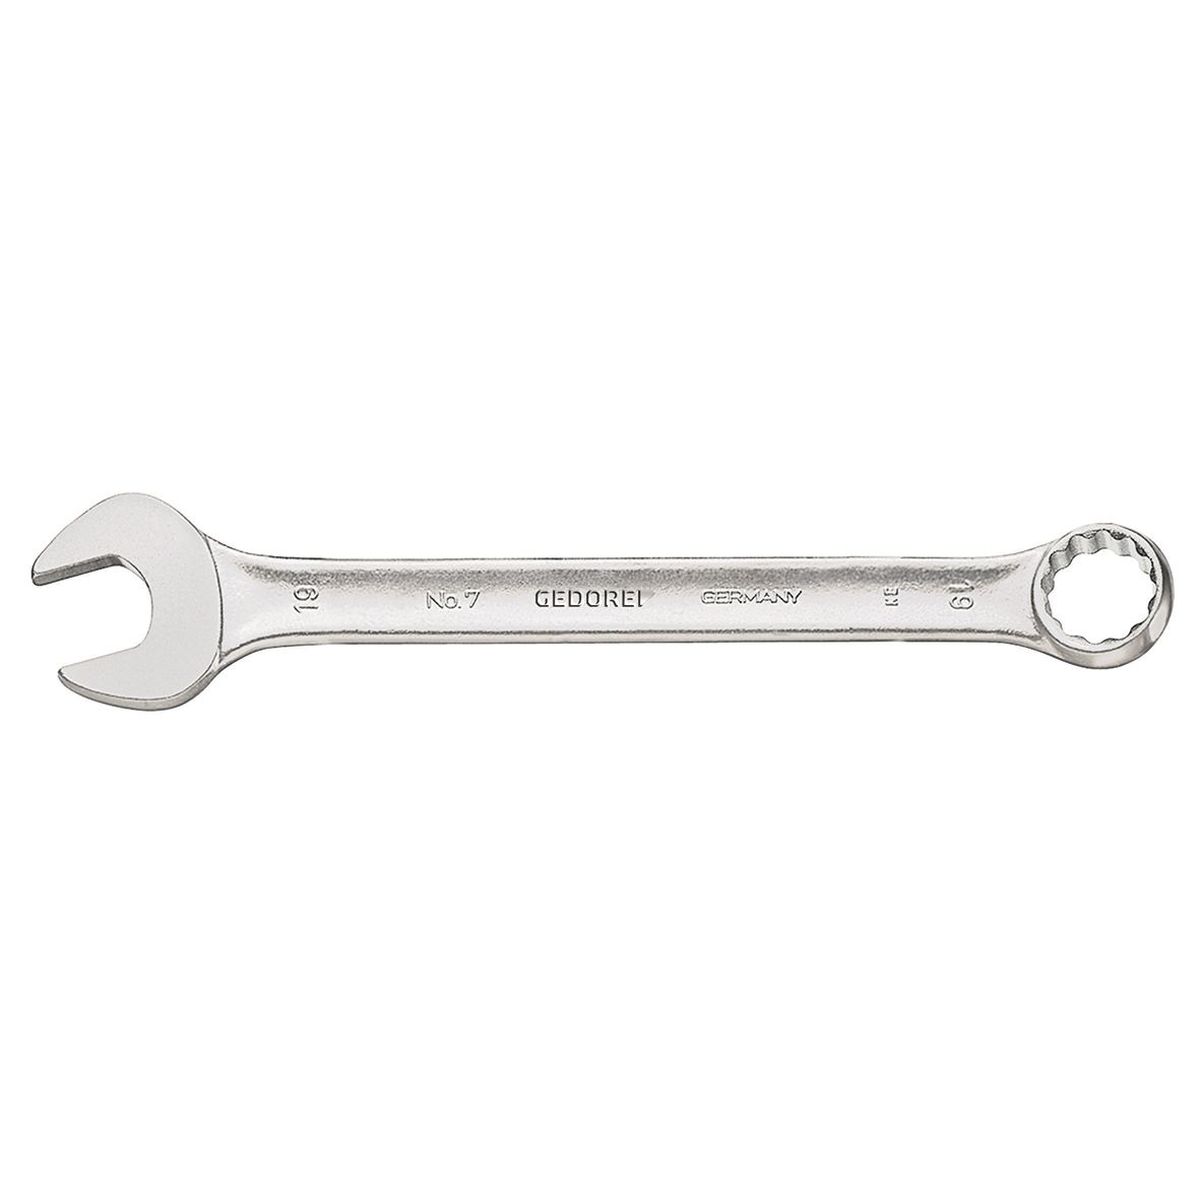 Combination spanner 24mm No.7 24 Gedore